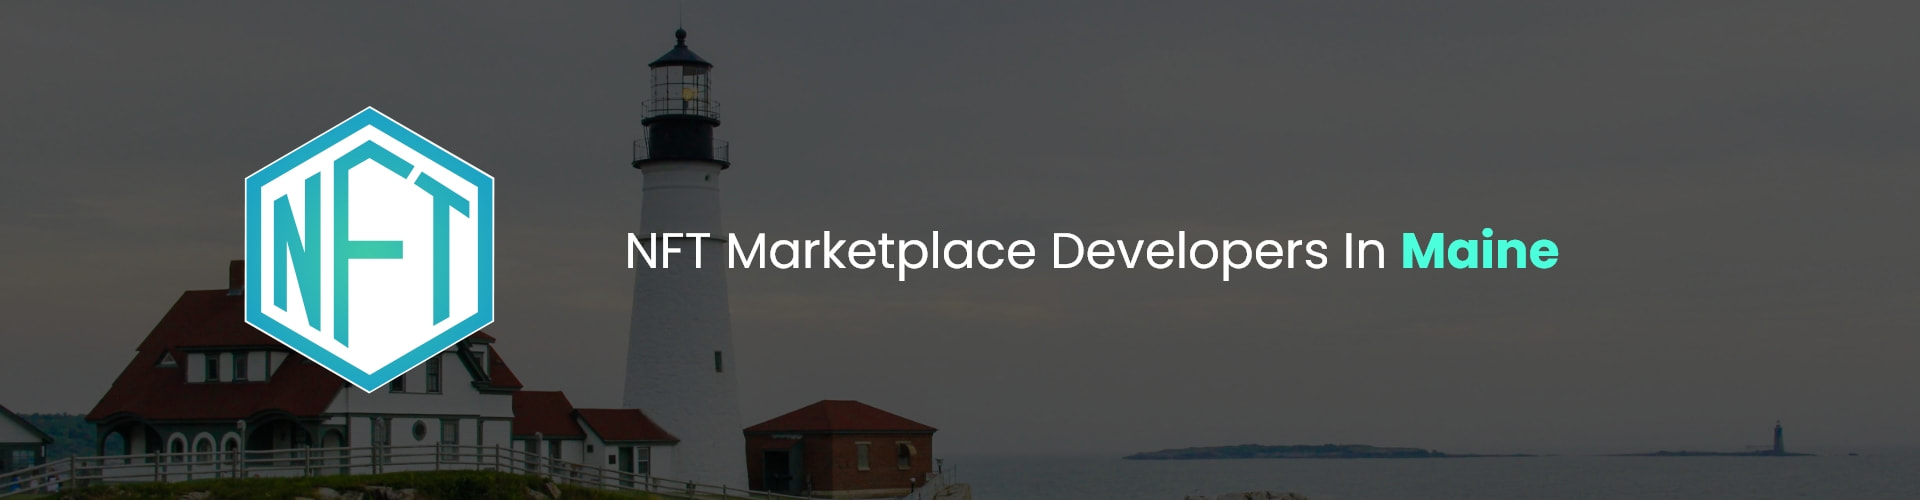 hire nft marketplace developers in maine